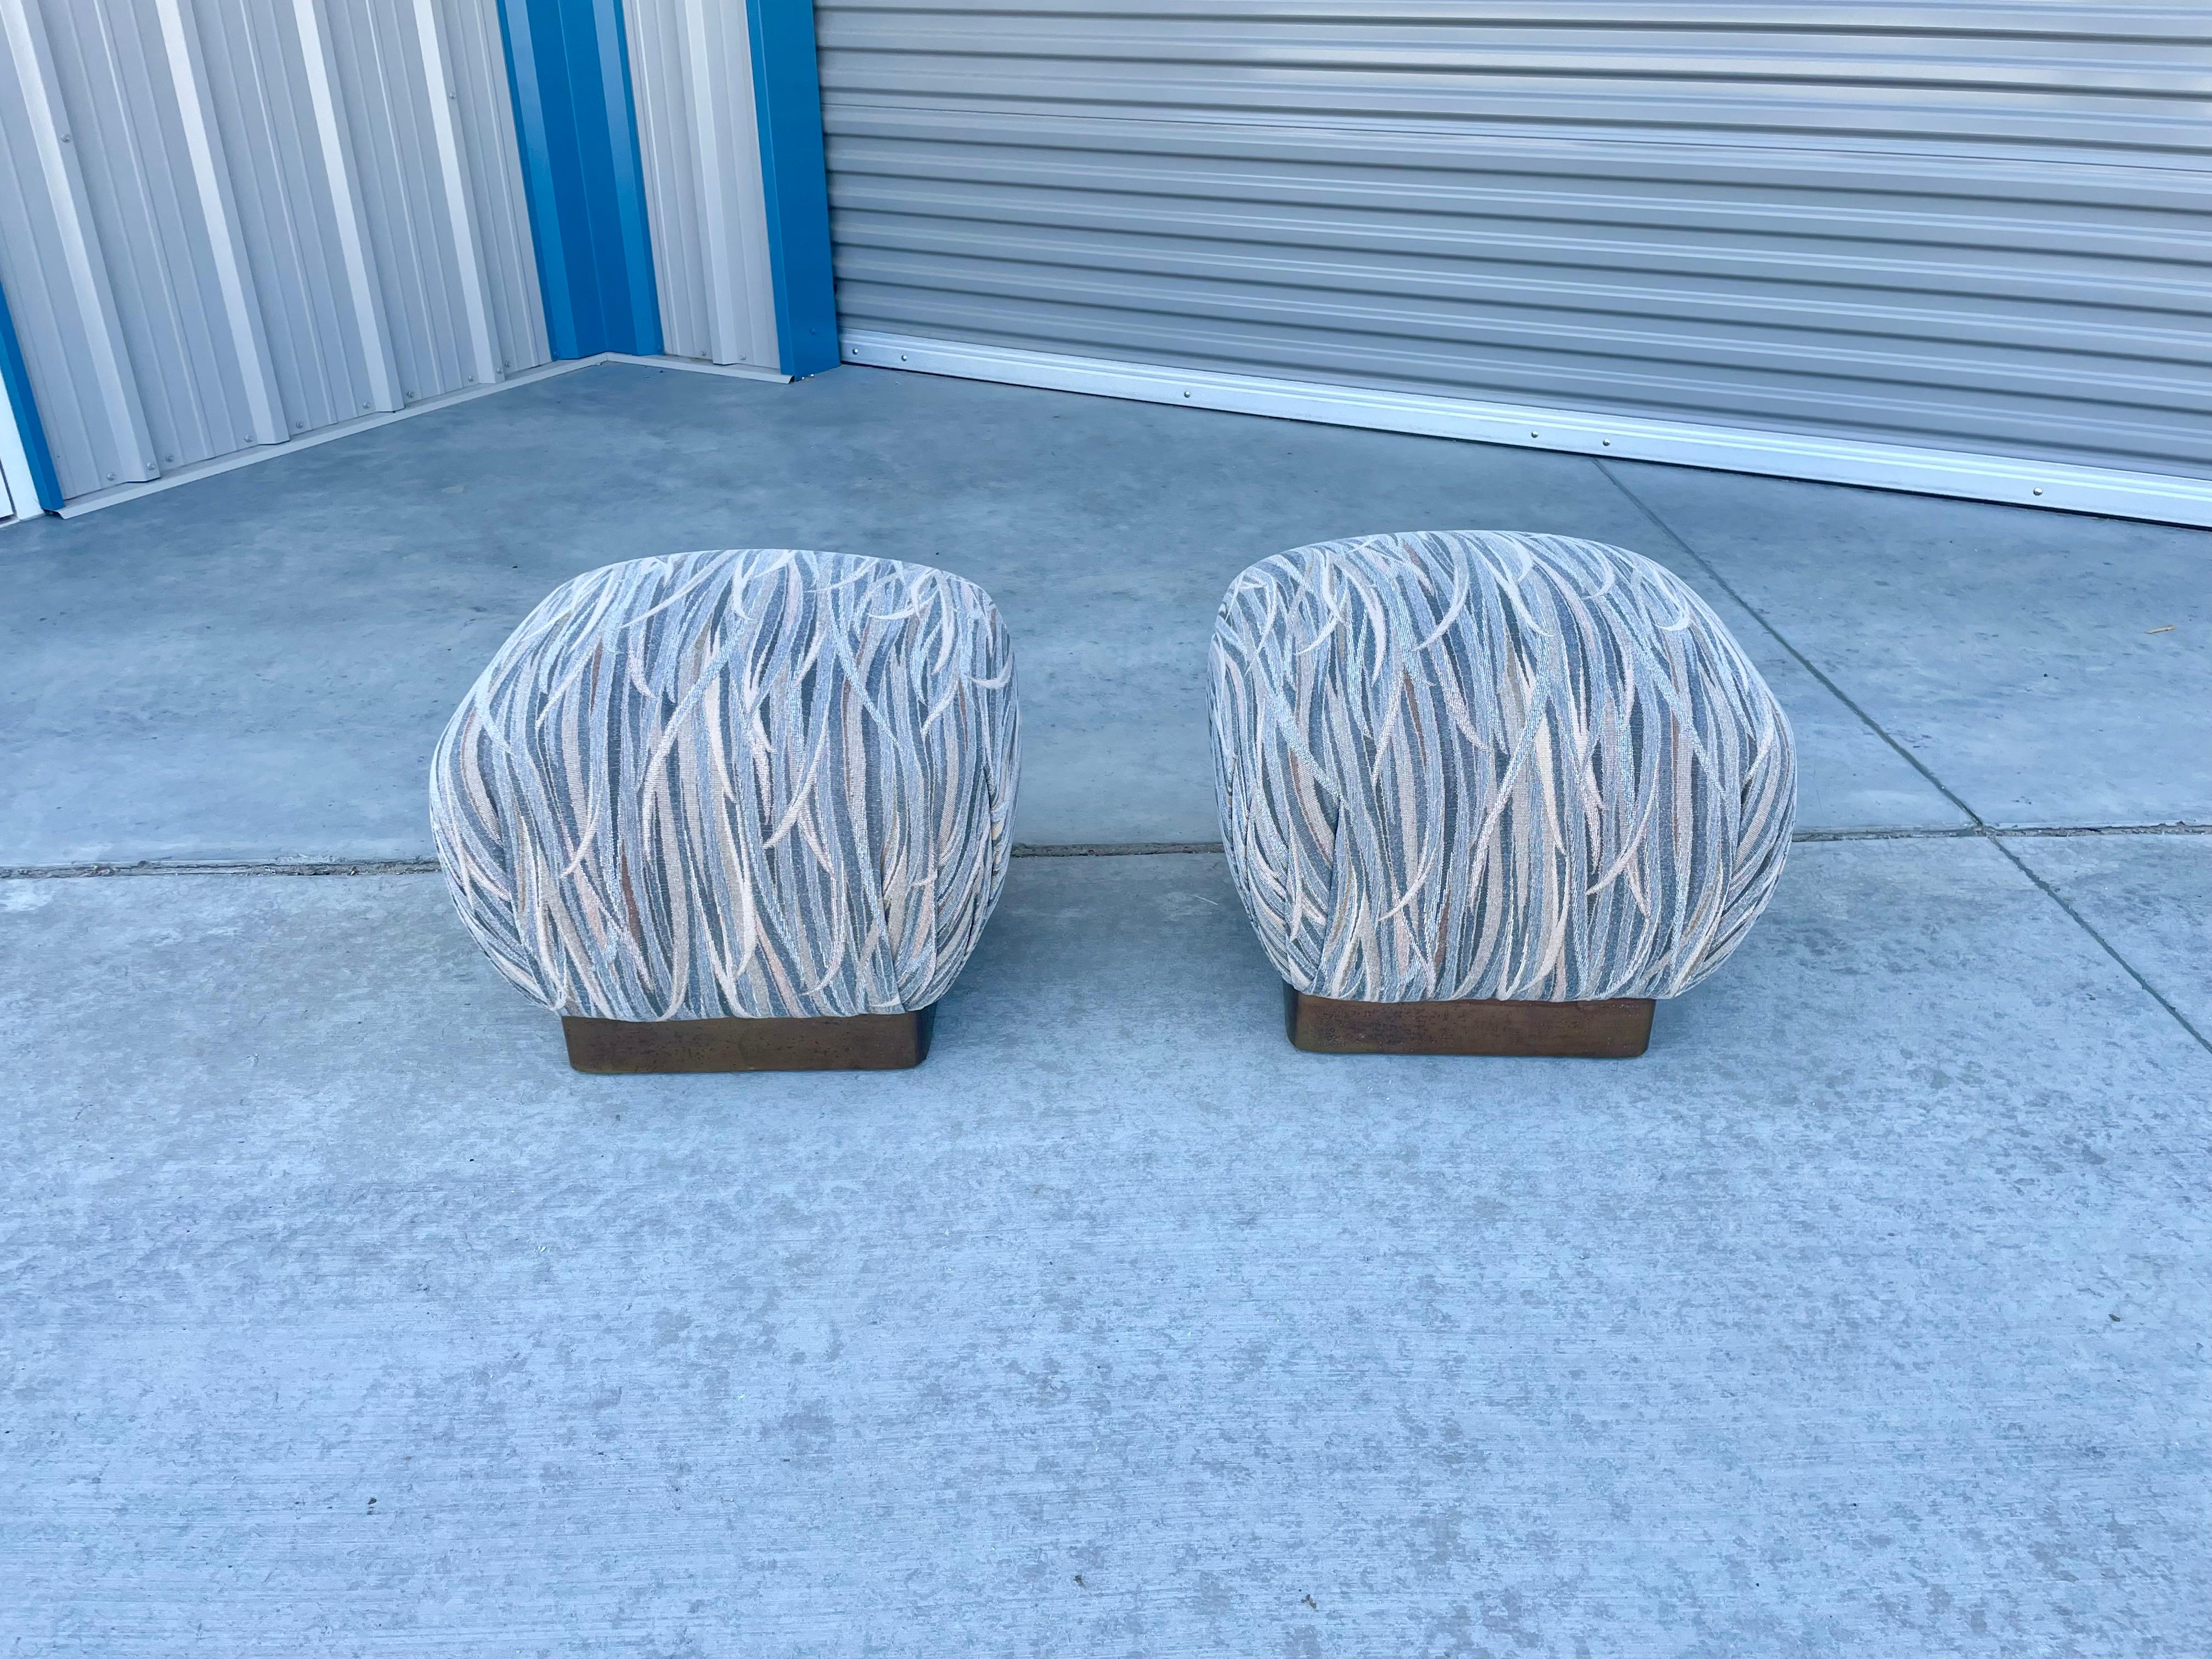 Wonderful pair of vintage brass poufs/ottomans designed by Marge Carson in the United States, circa 1970s. Each pouf features a brass base, and each cushion seems to have the design of a delicious souffle that is about to burst. This is ideal for